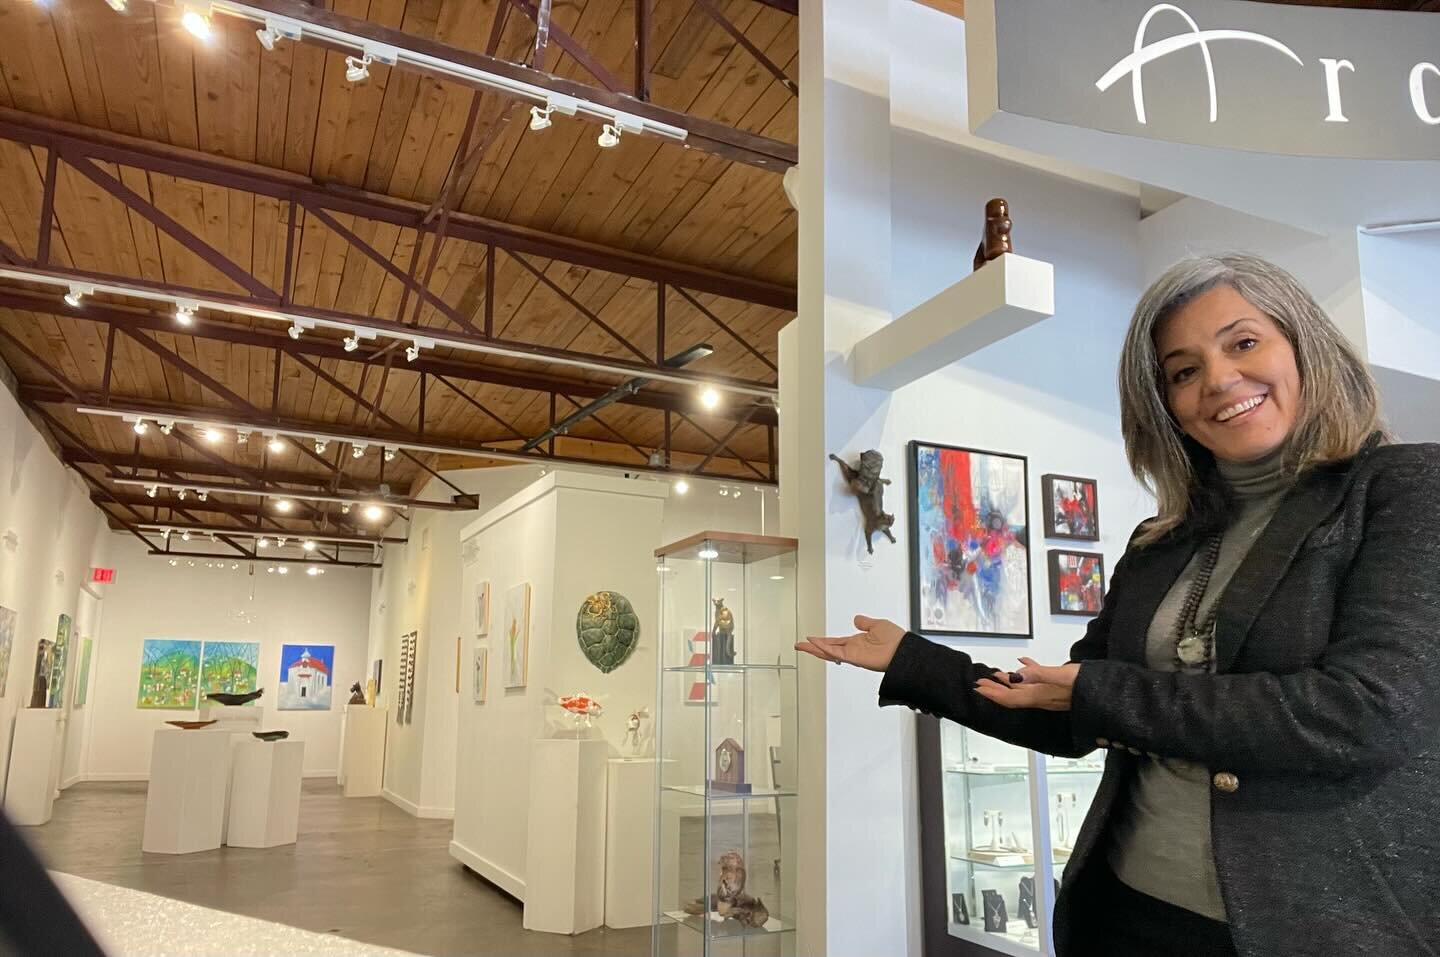 Stop in today at @archwaygallery and I&rsquo;ll give you a tour of all the artwork on #exhibit by our amazing #houston #artists!